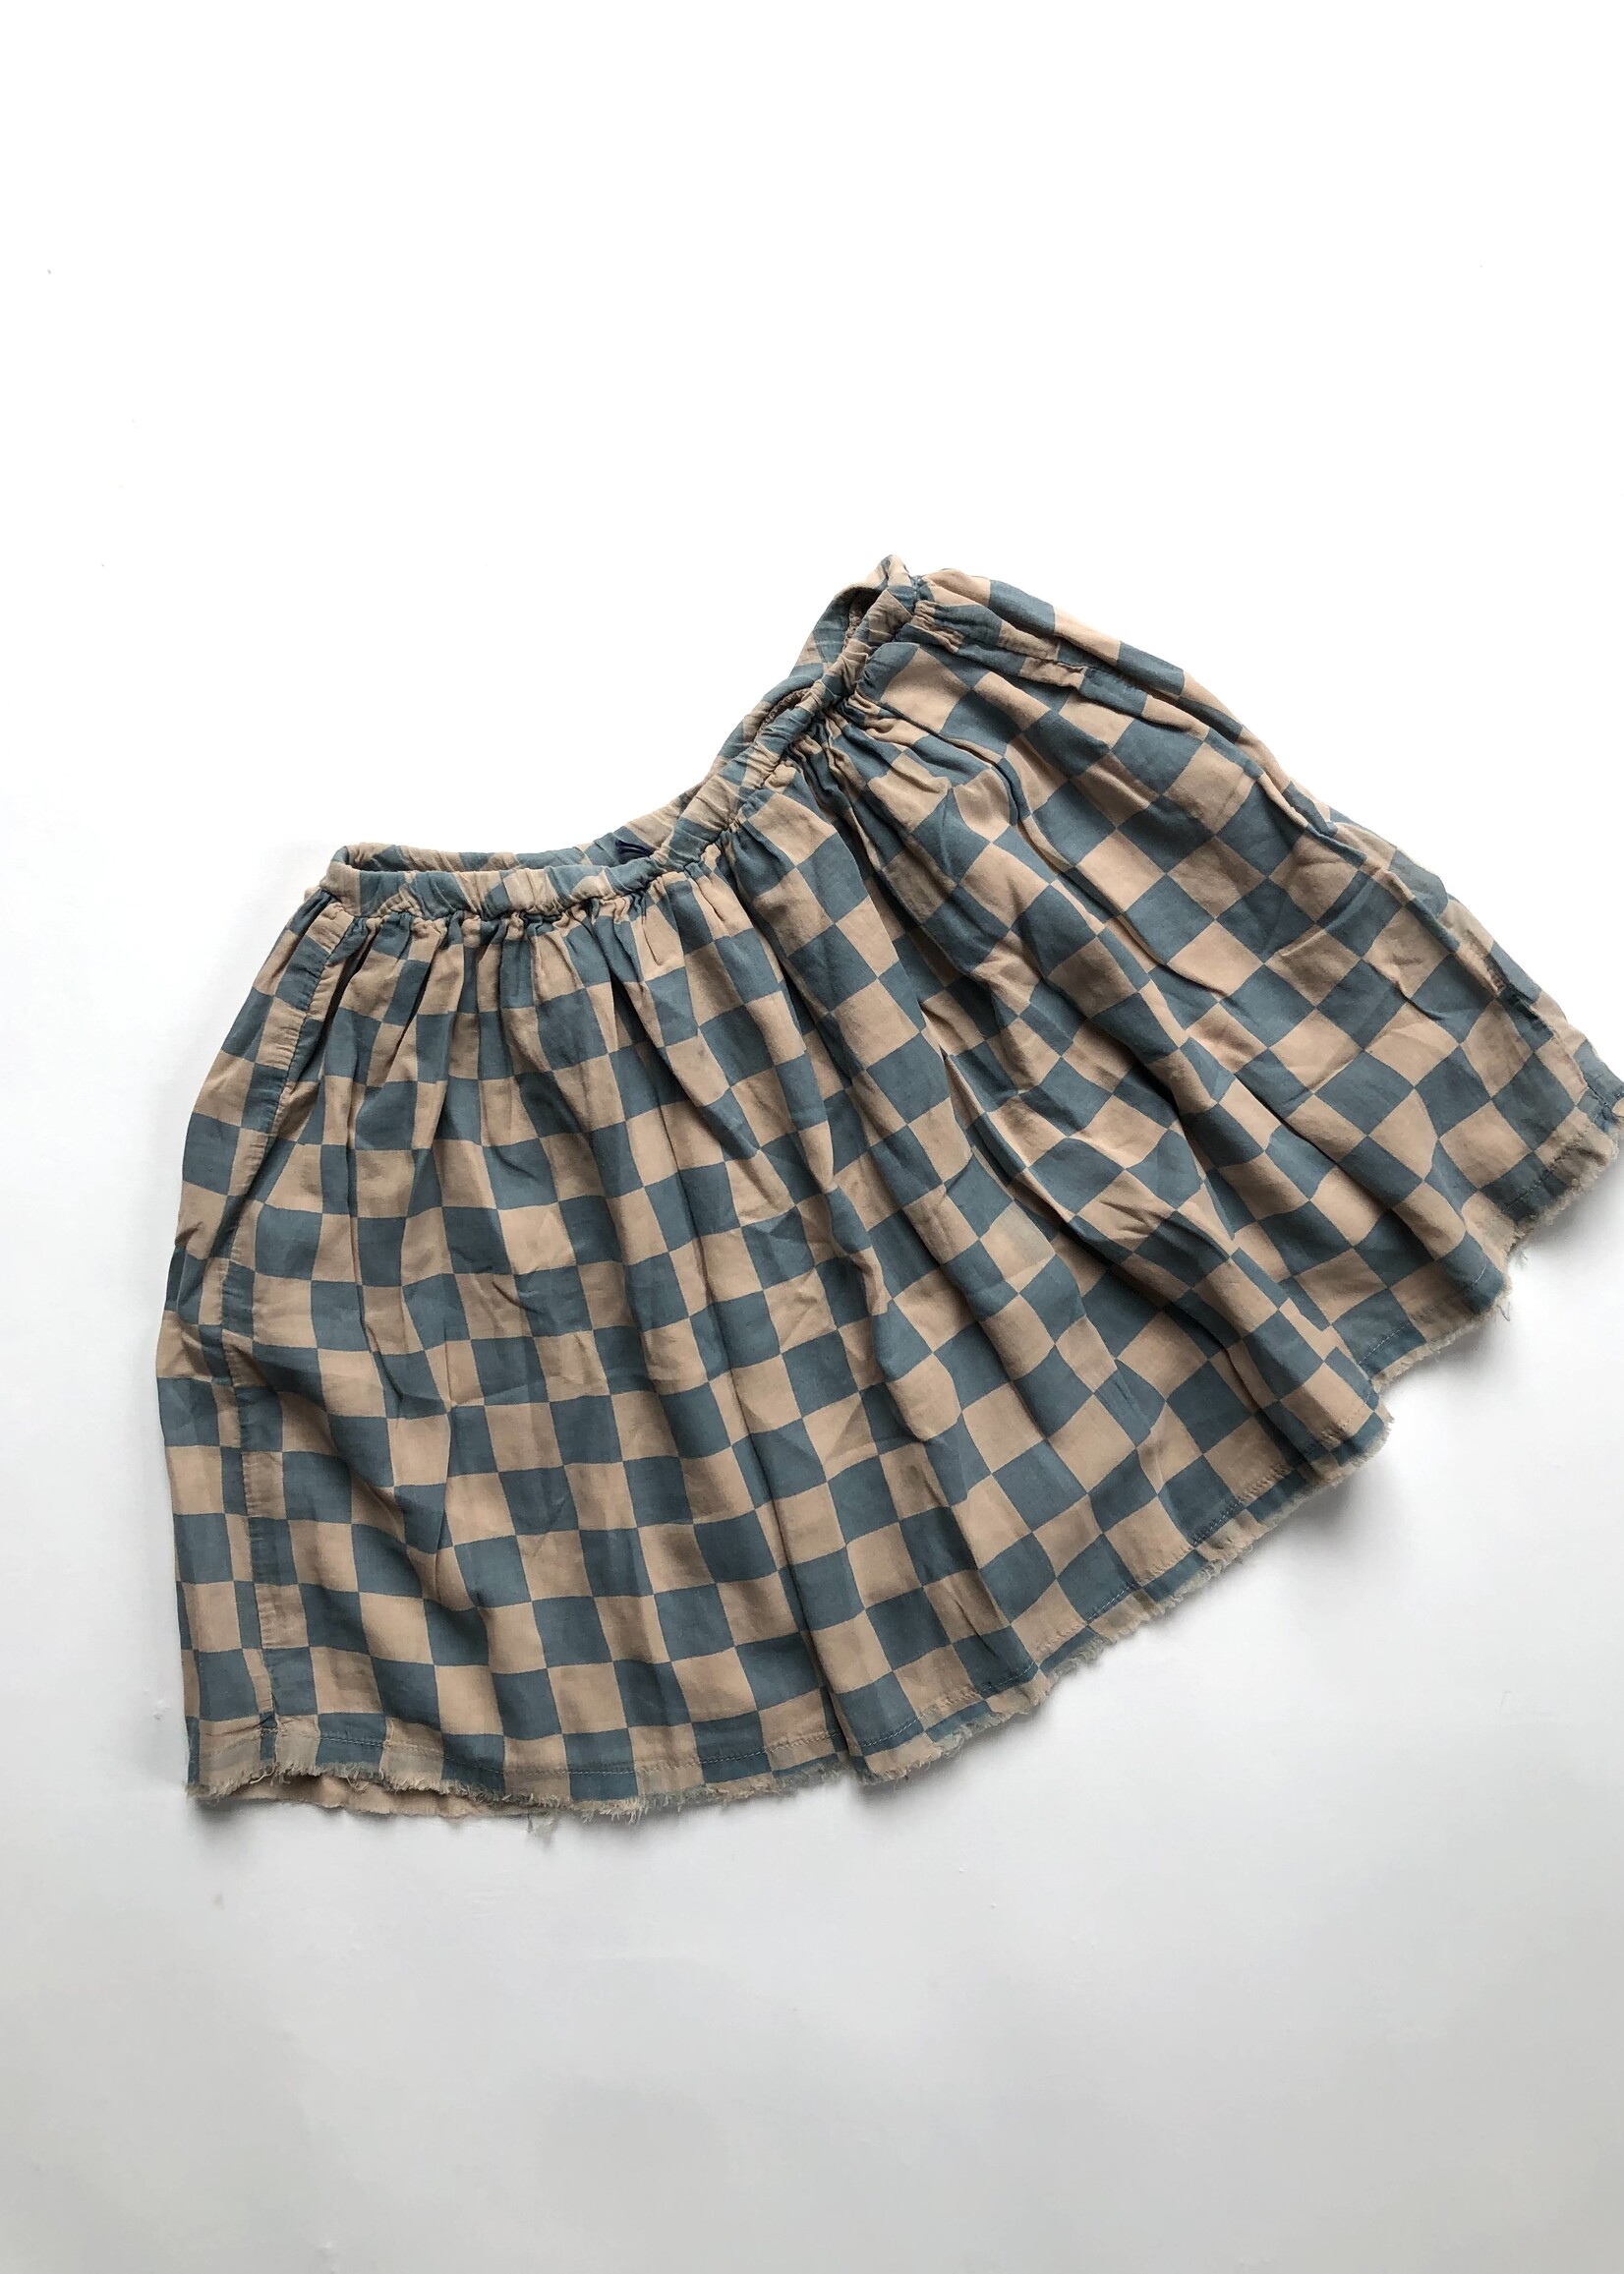 Long Live The Queen Light blue check skirt 4y